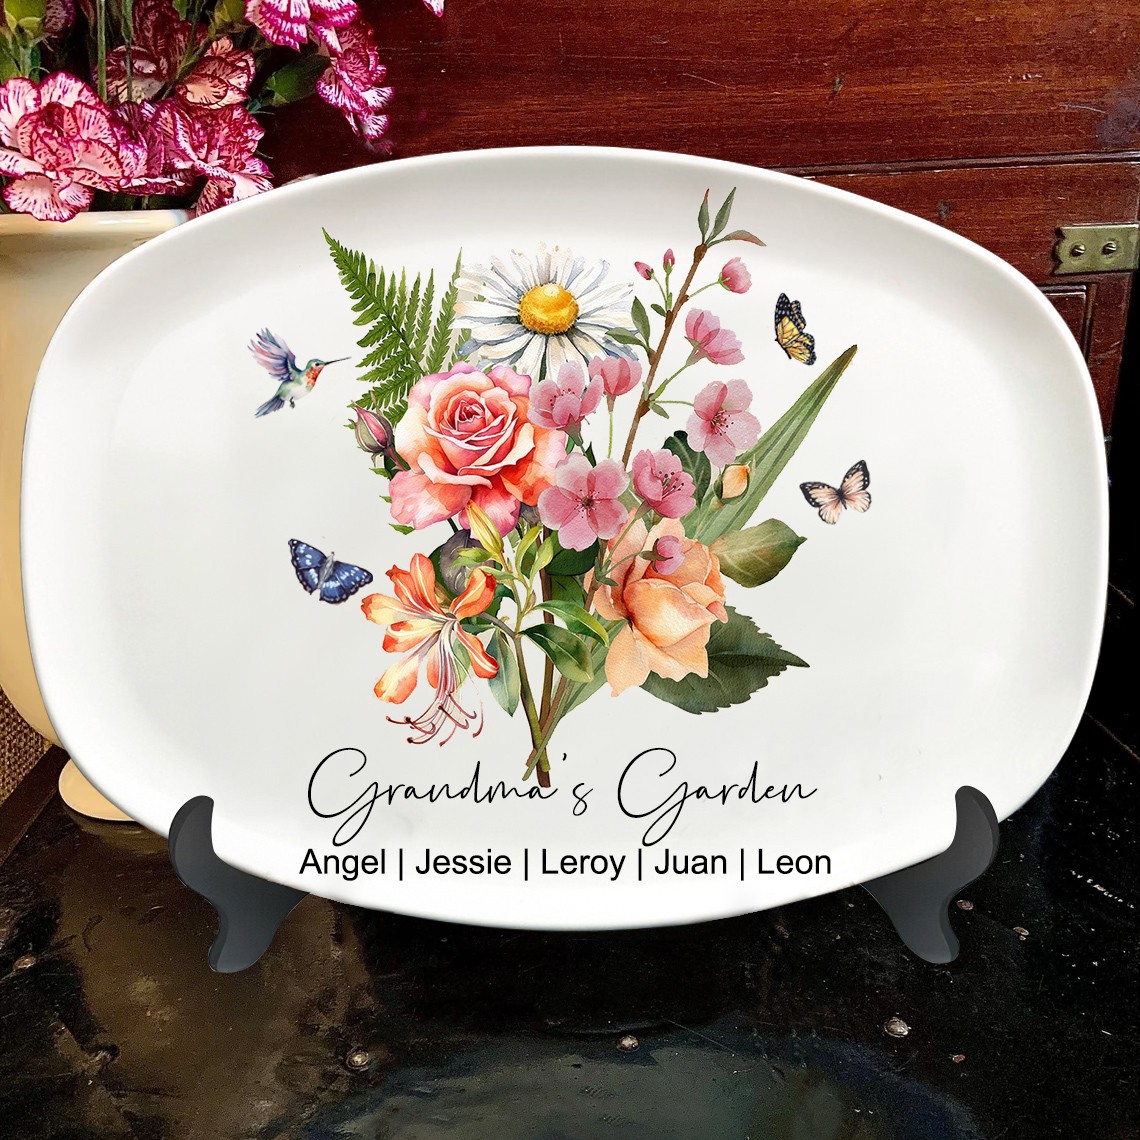 Personalized Birth Flower Bouquet Grandma's Garden Platter With Grandkids Names Gift For Mom Grandma Mother's Day Gift